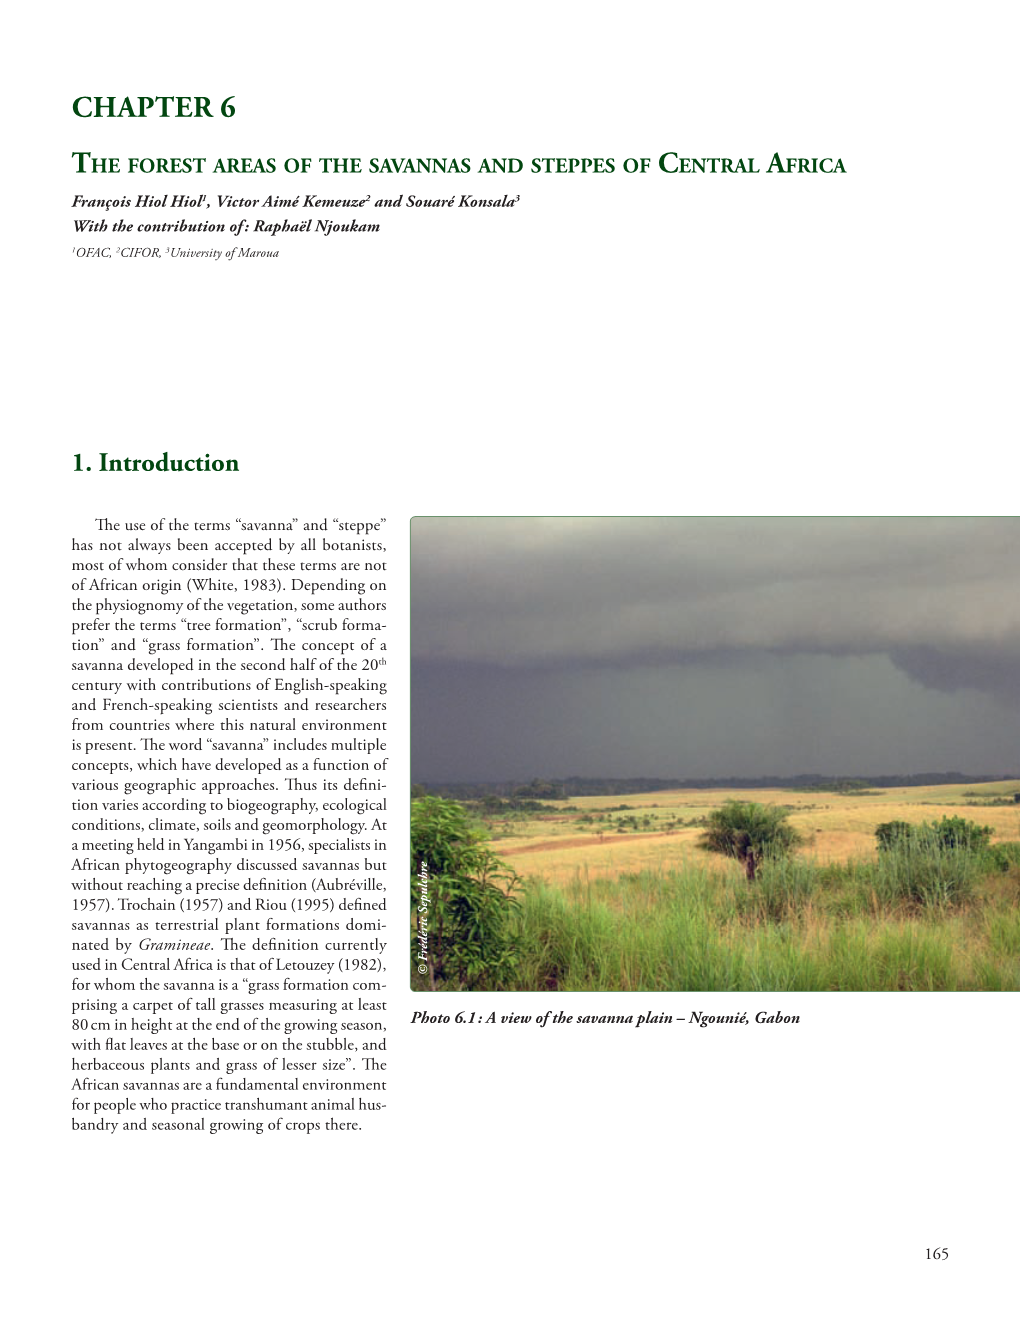 The Forest Areas of the Savannas and Steppes of Central Africa